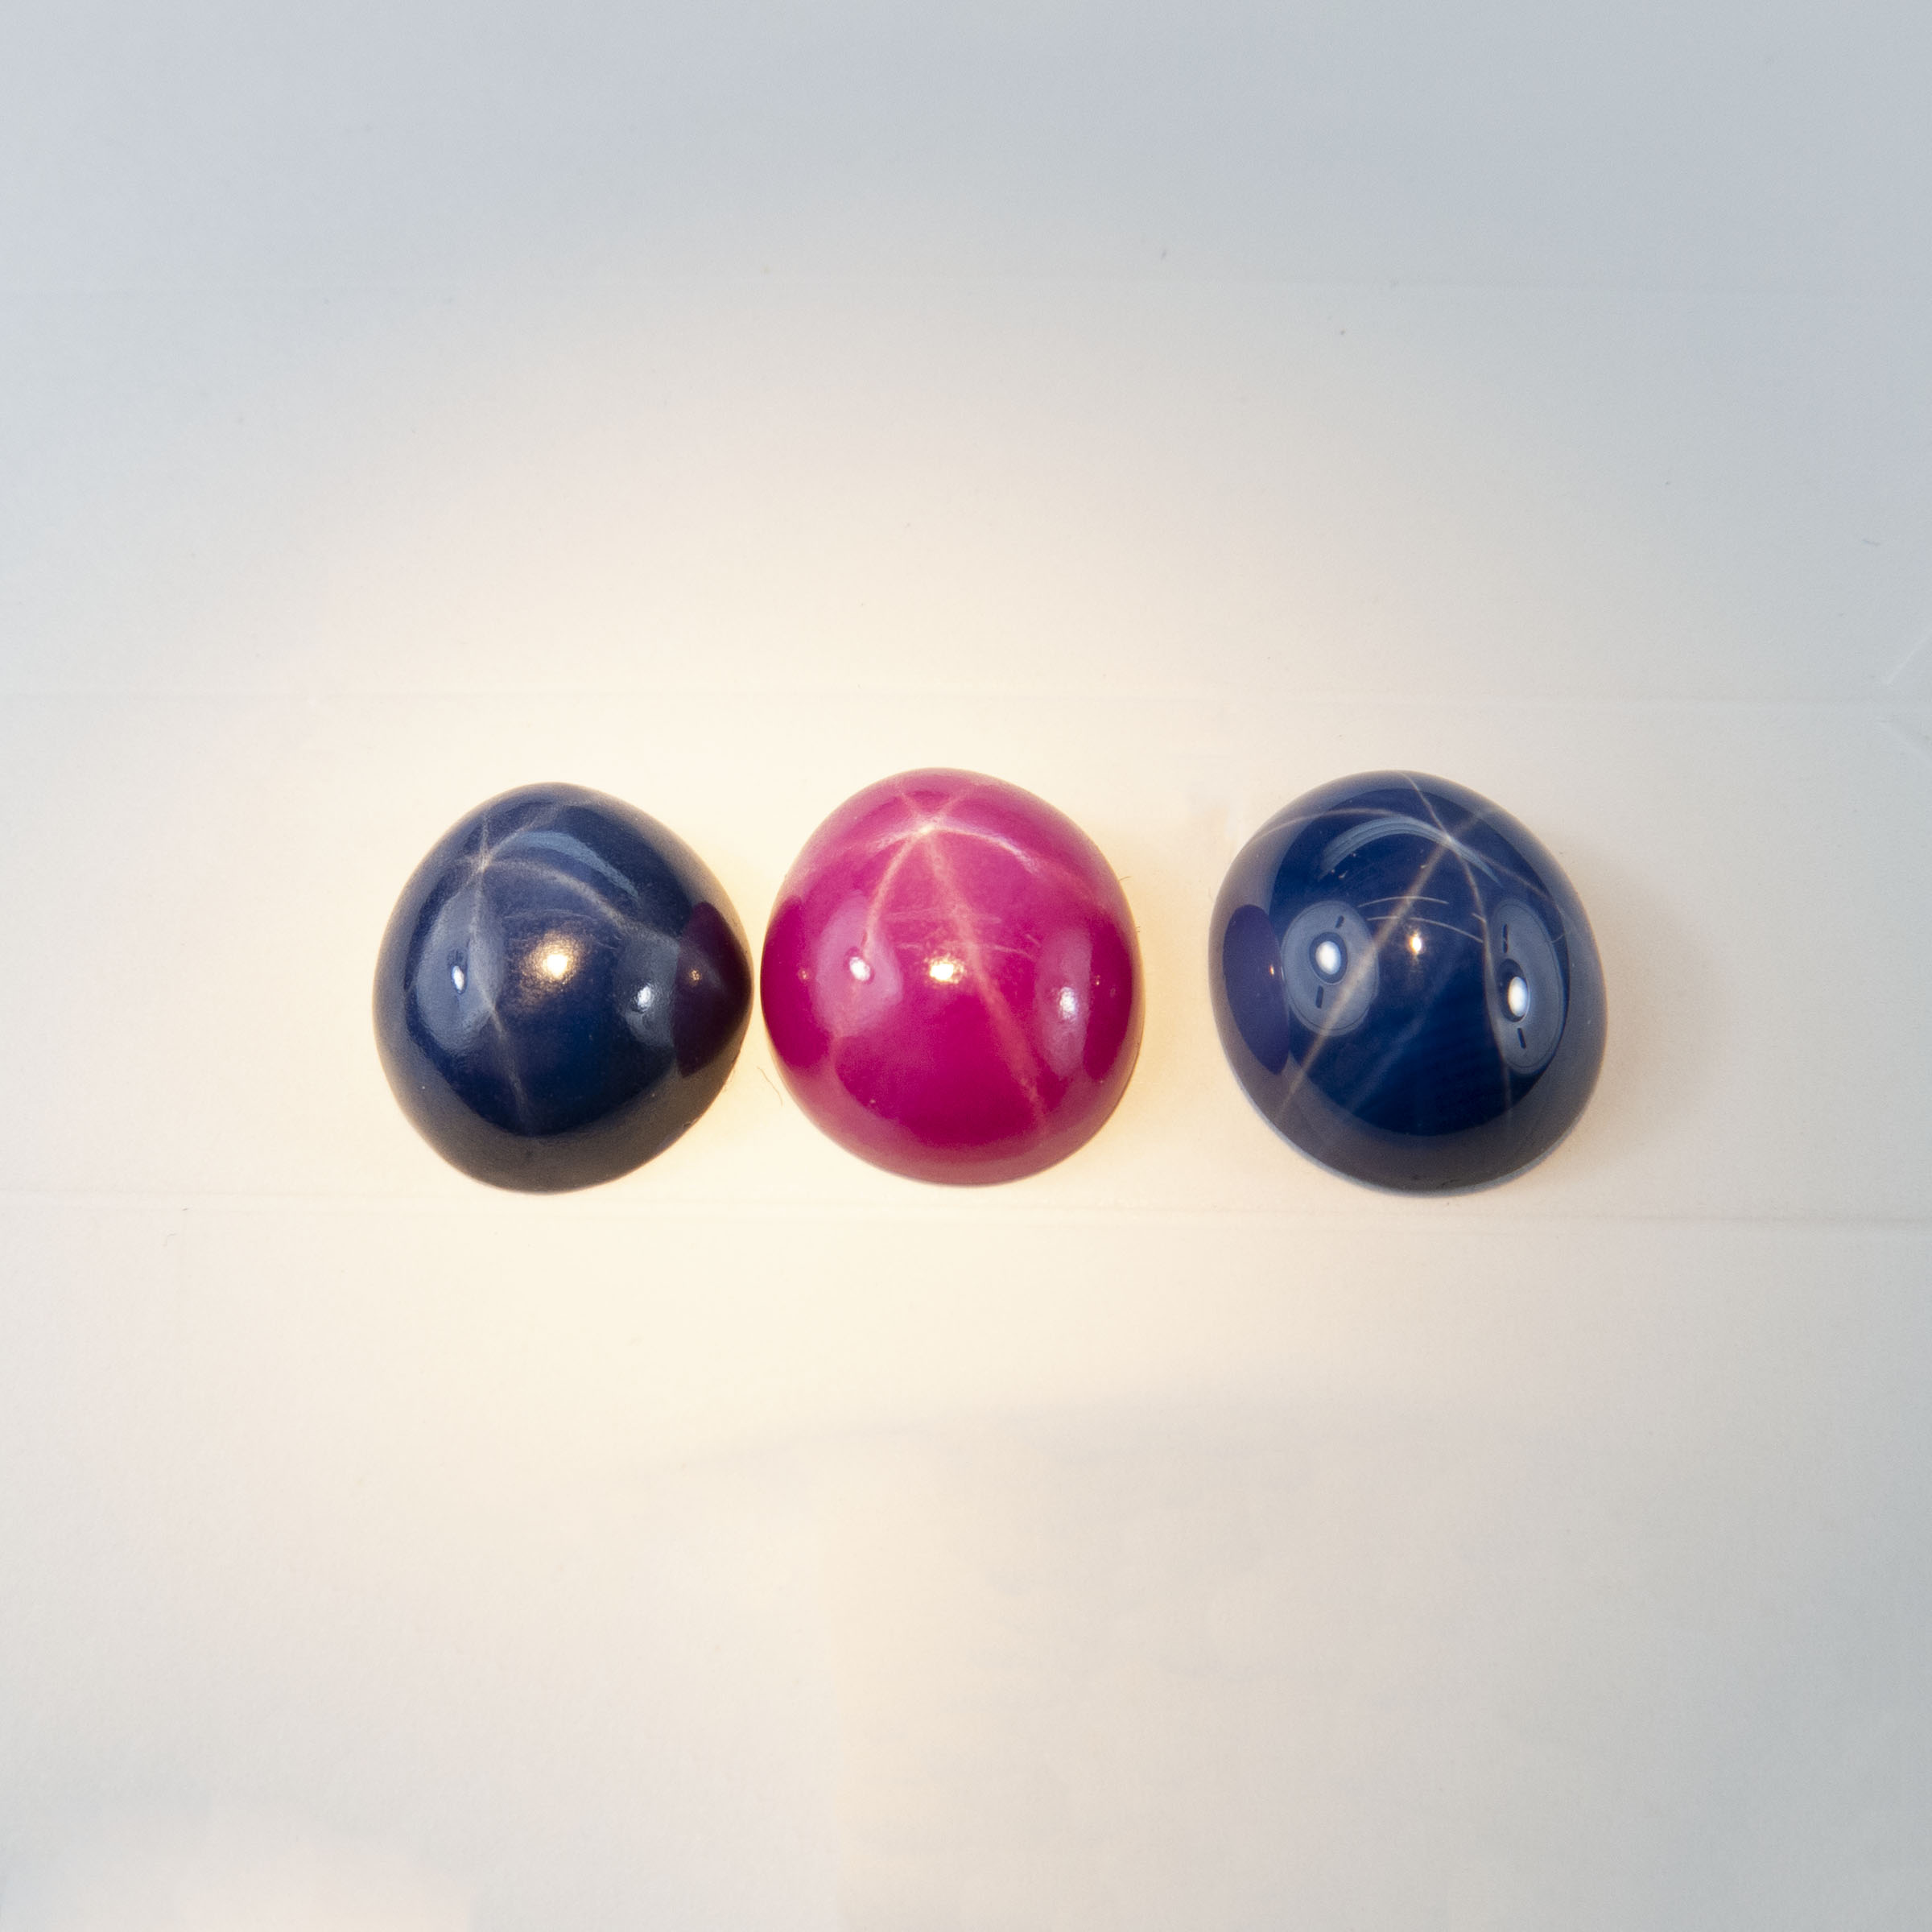 Synthetic Oval Star Ruby And 2 Synthetic Oval Star Sapphire Cabochons